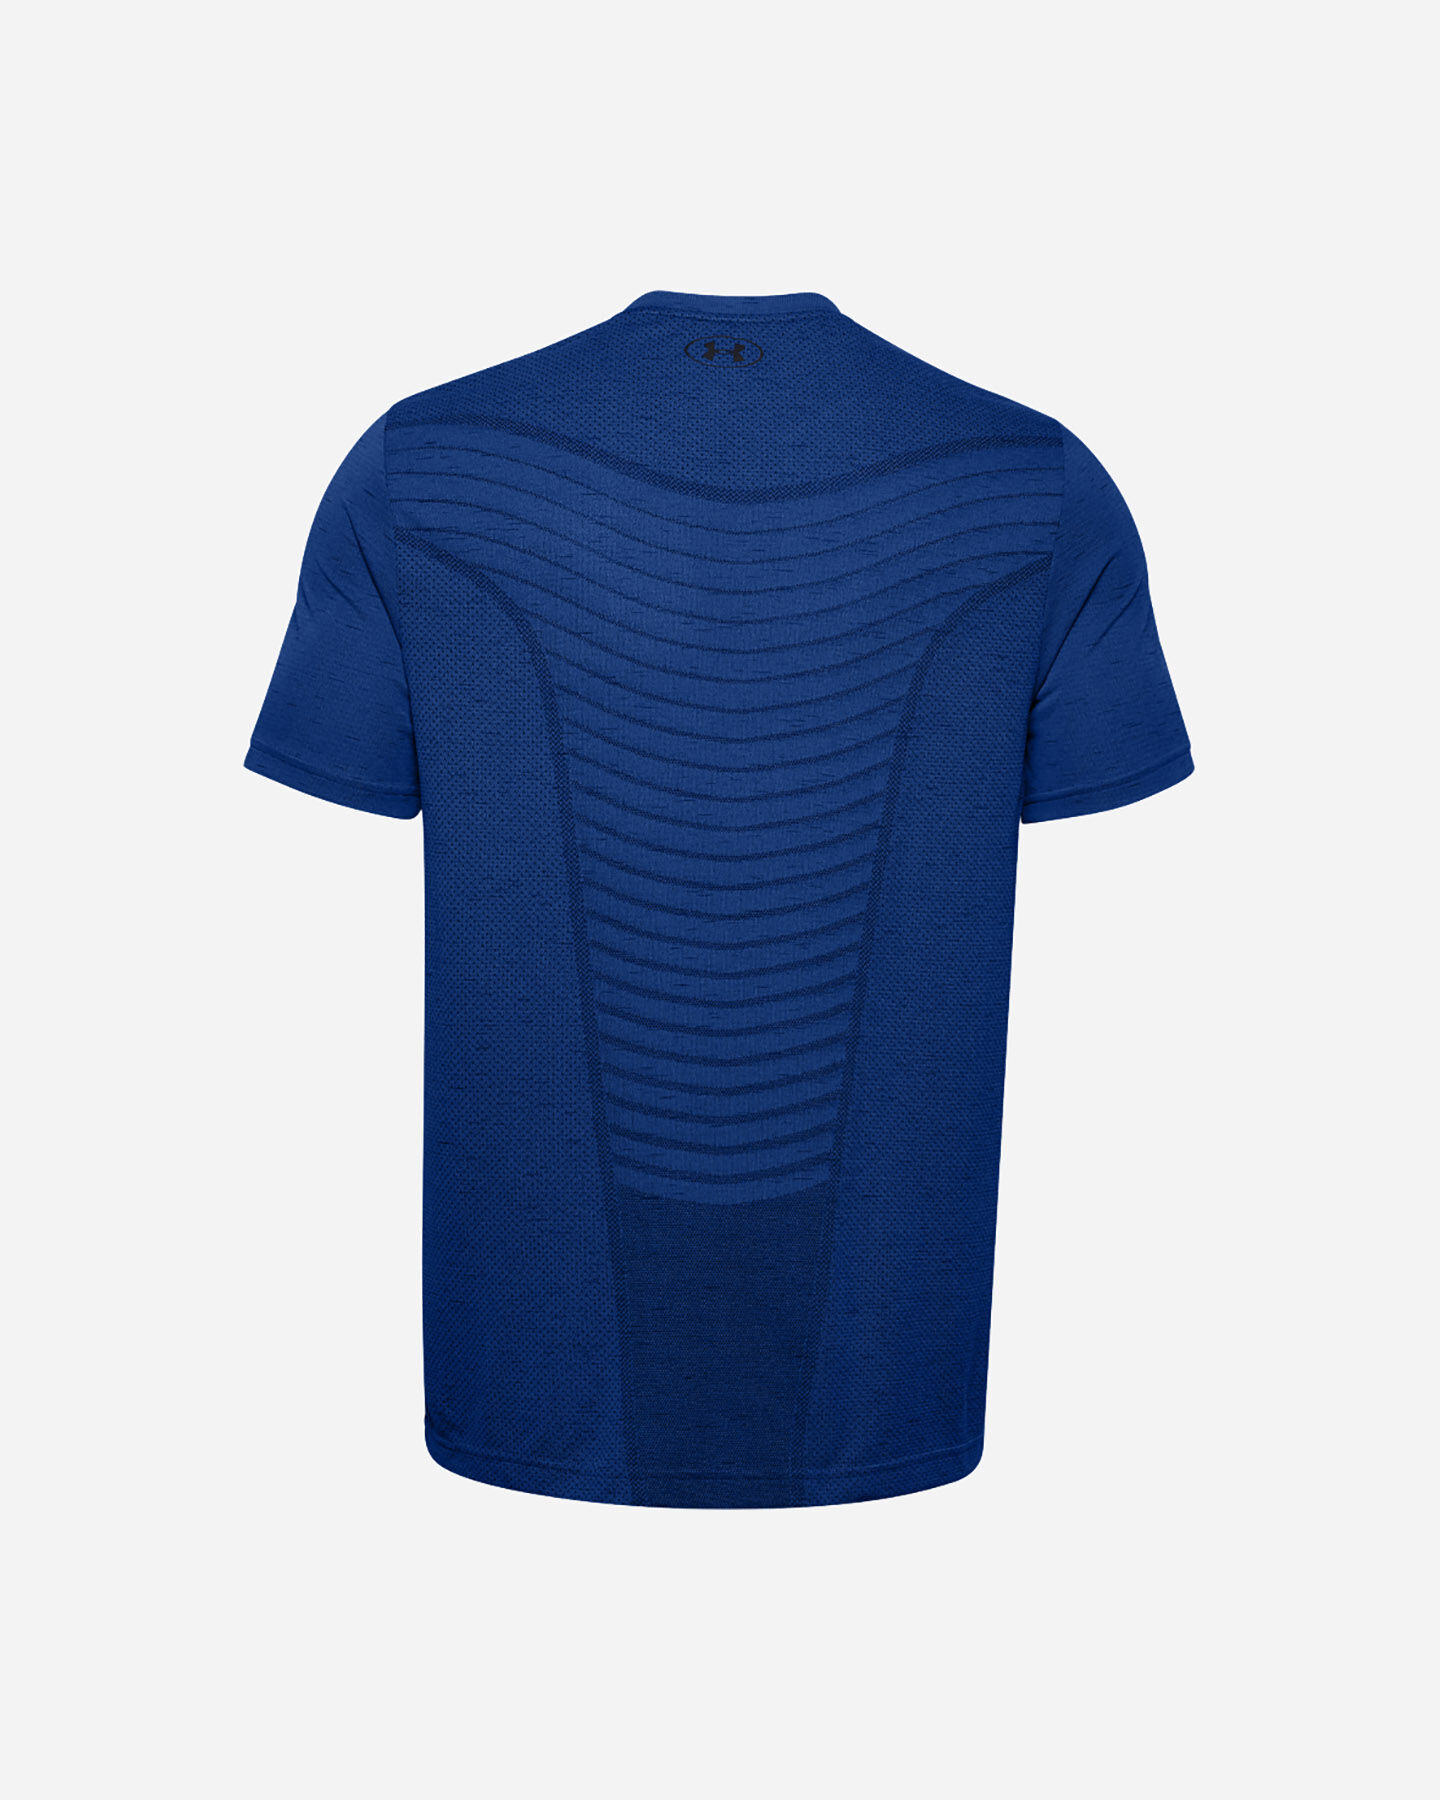  T-Shirt training UNDER ARMOUR SEAMLESS WAVE M S5228740|0400|SM scatto 1